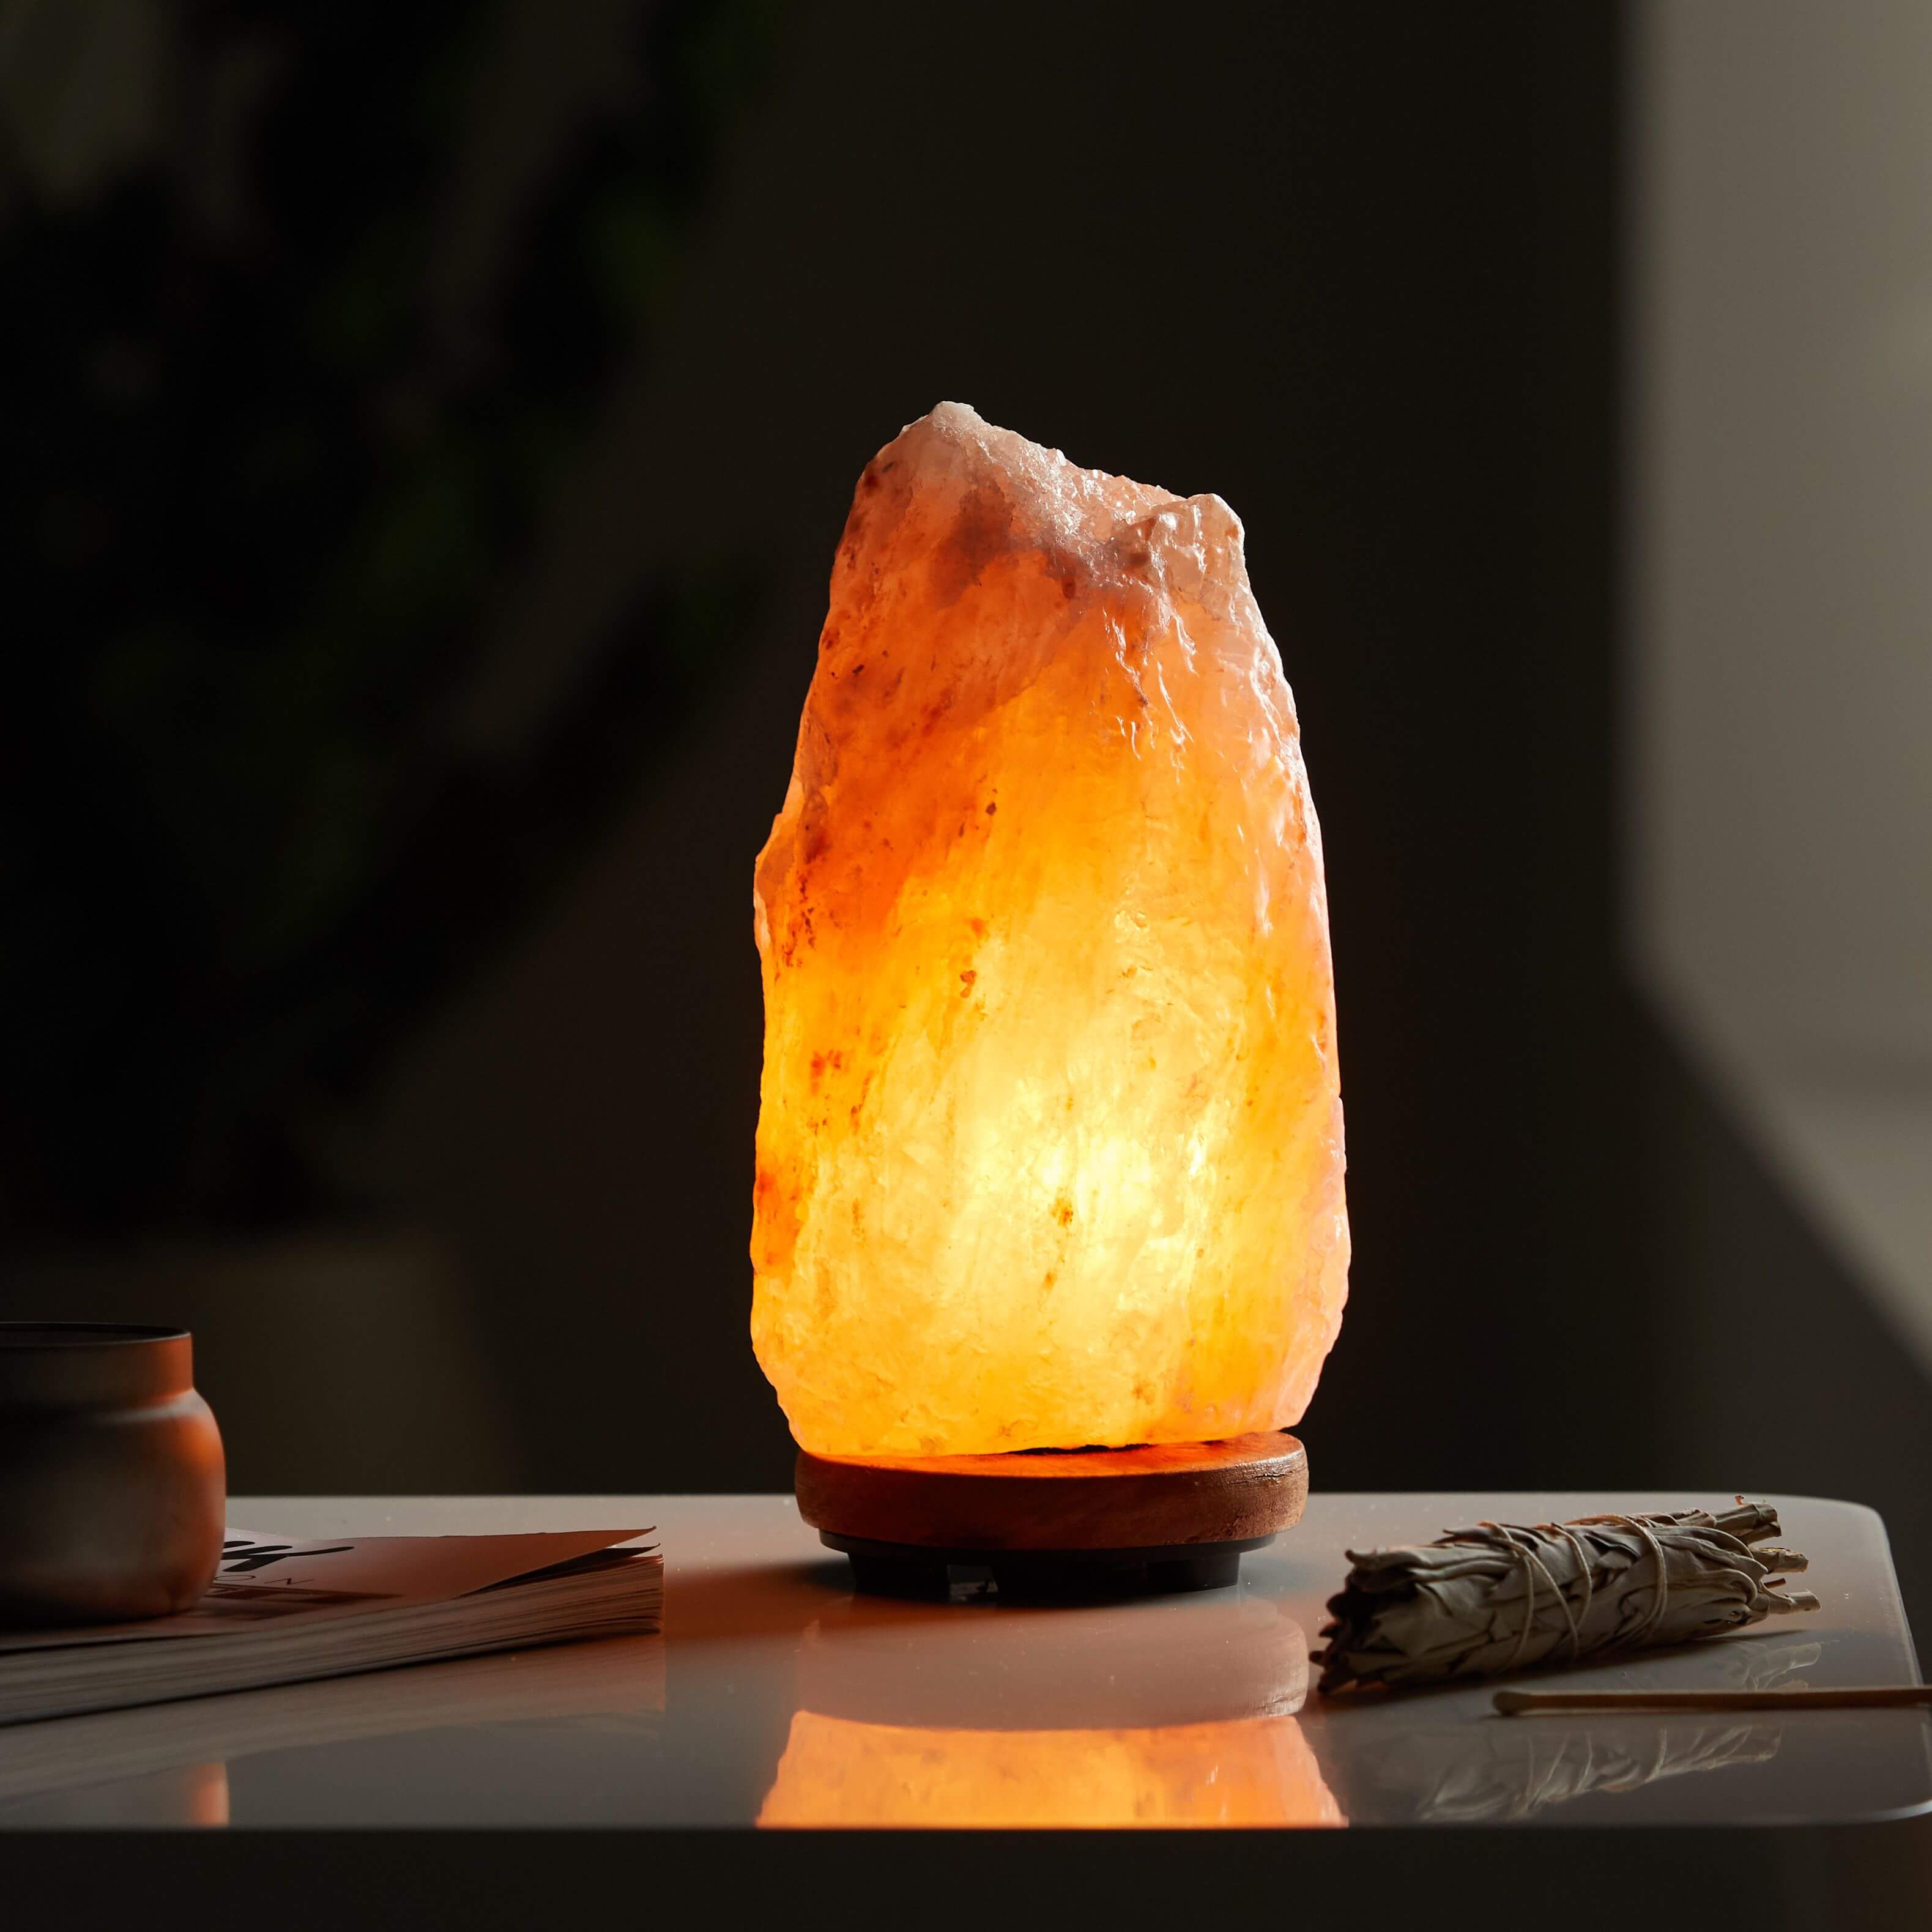 How To Change The Bulb In A Salt Lamp